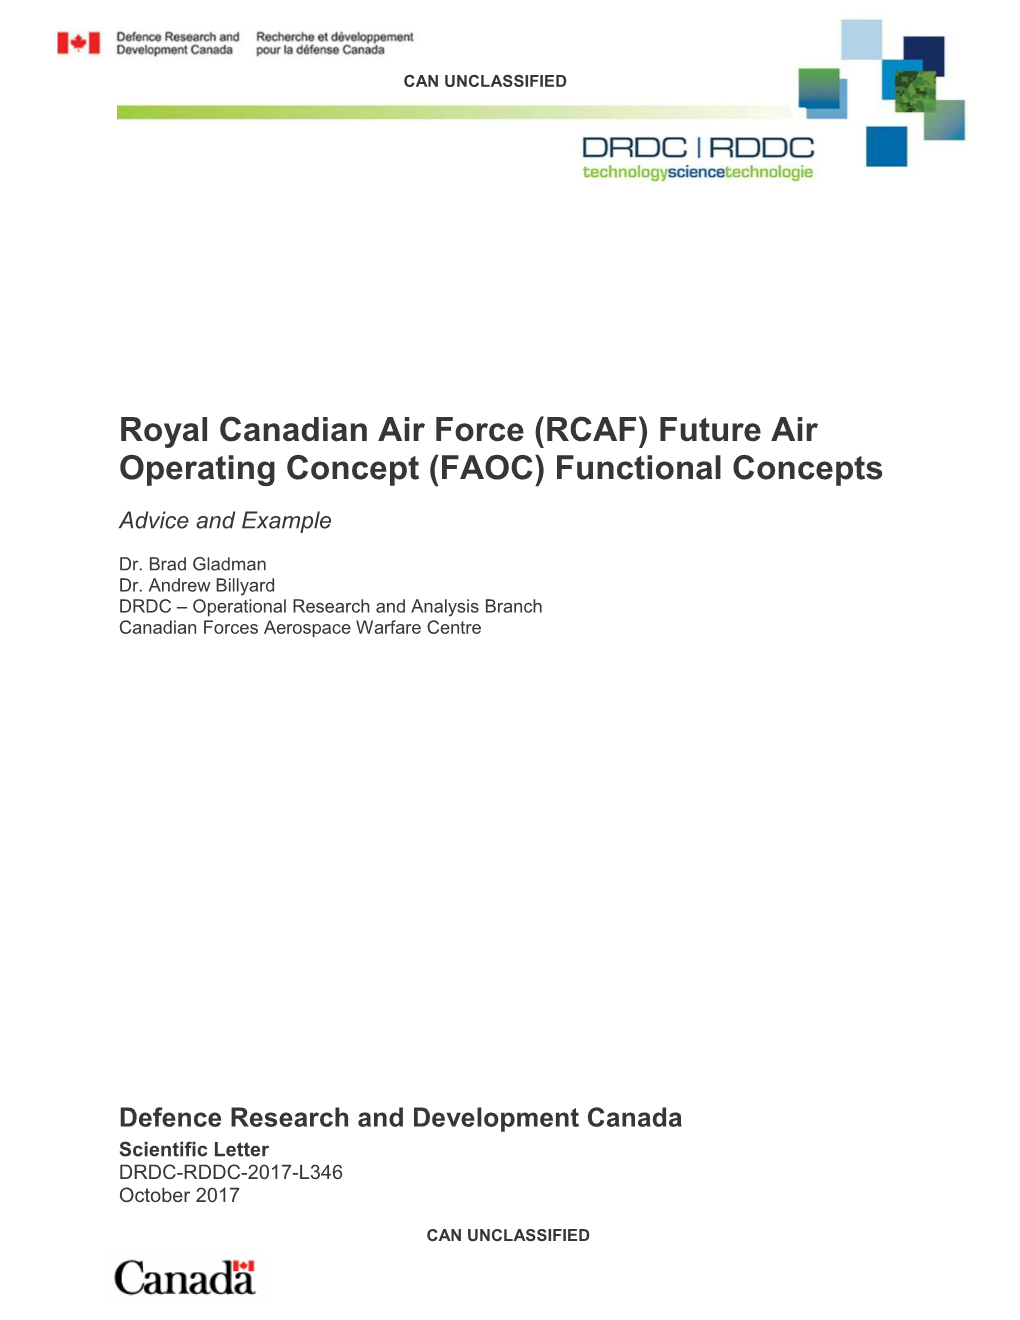 Royal Canadian Air Force (RCAF) Future Air Operating Concept (FAOC) Functional Concepts Advice and Example